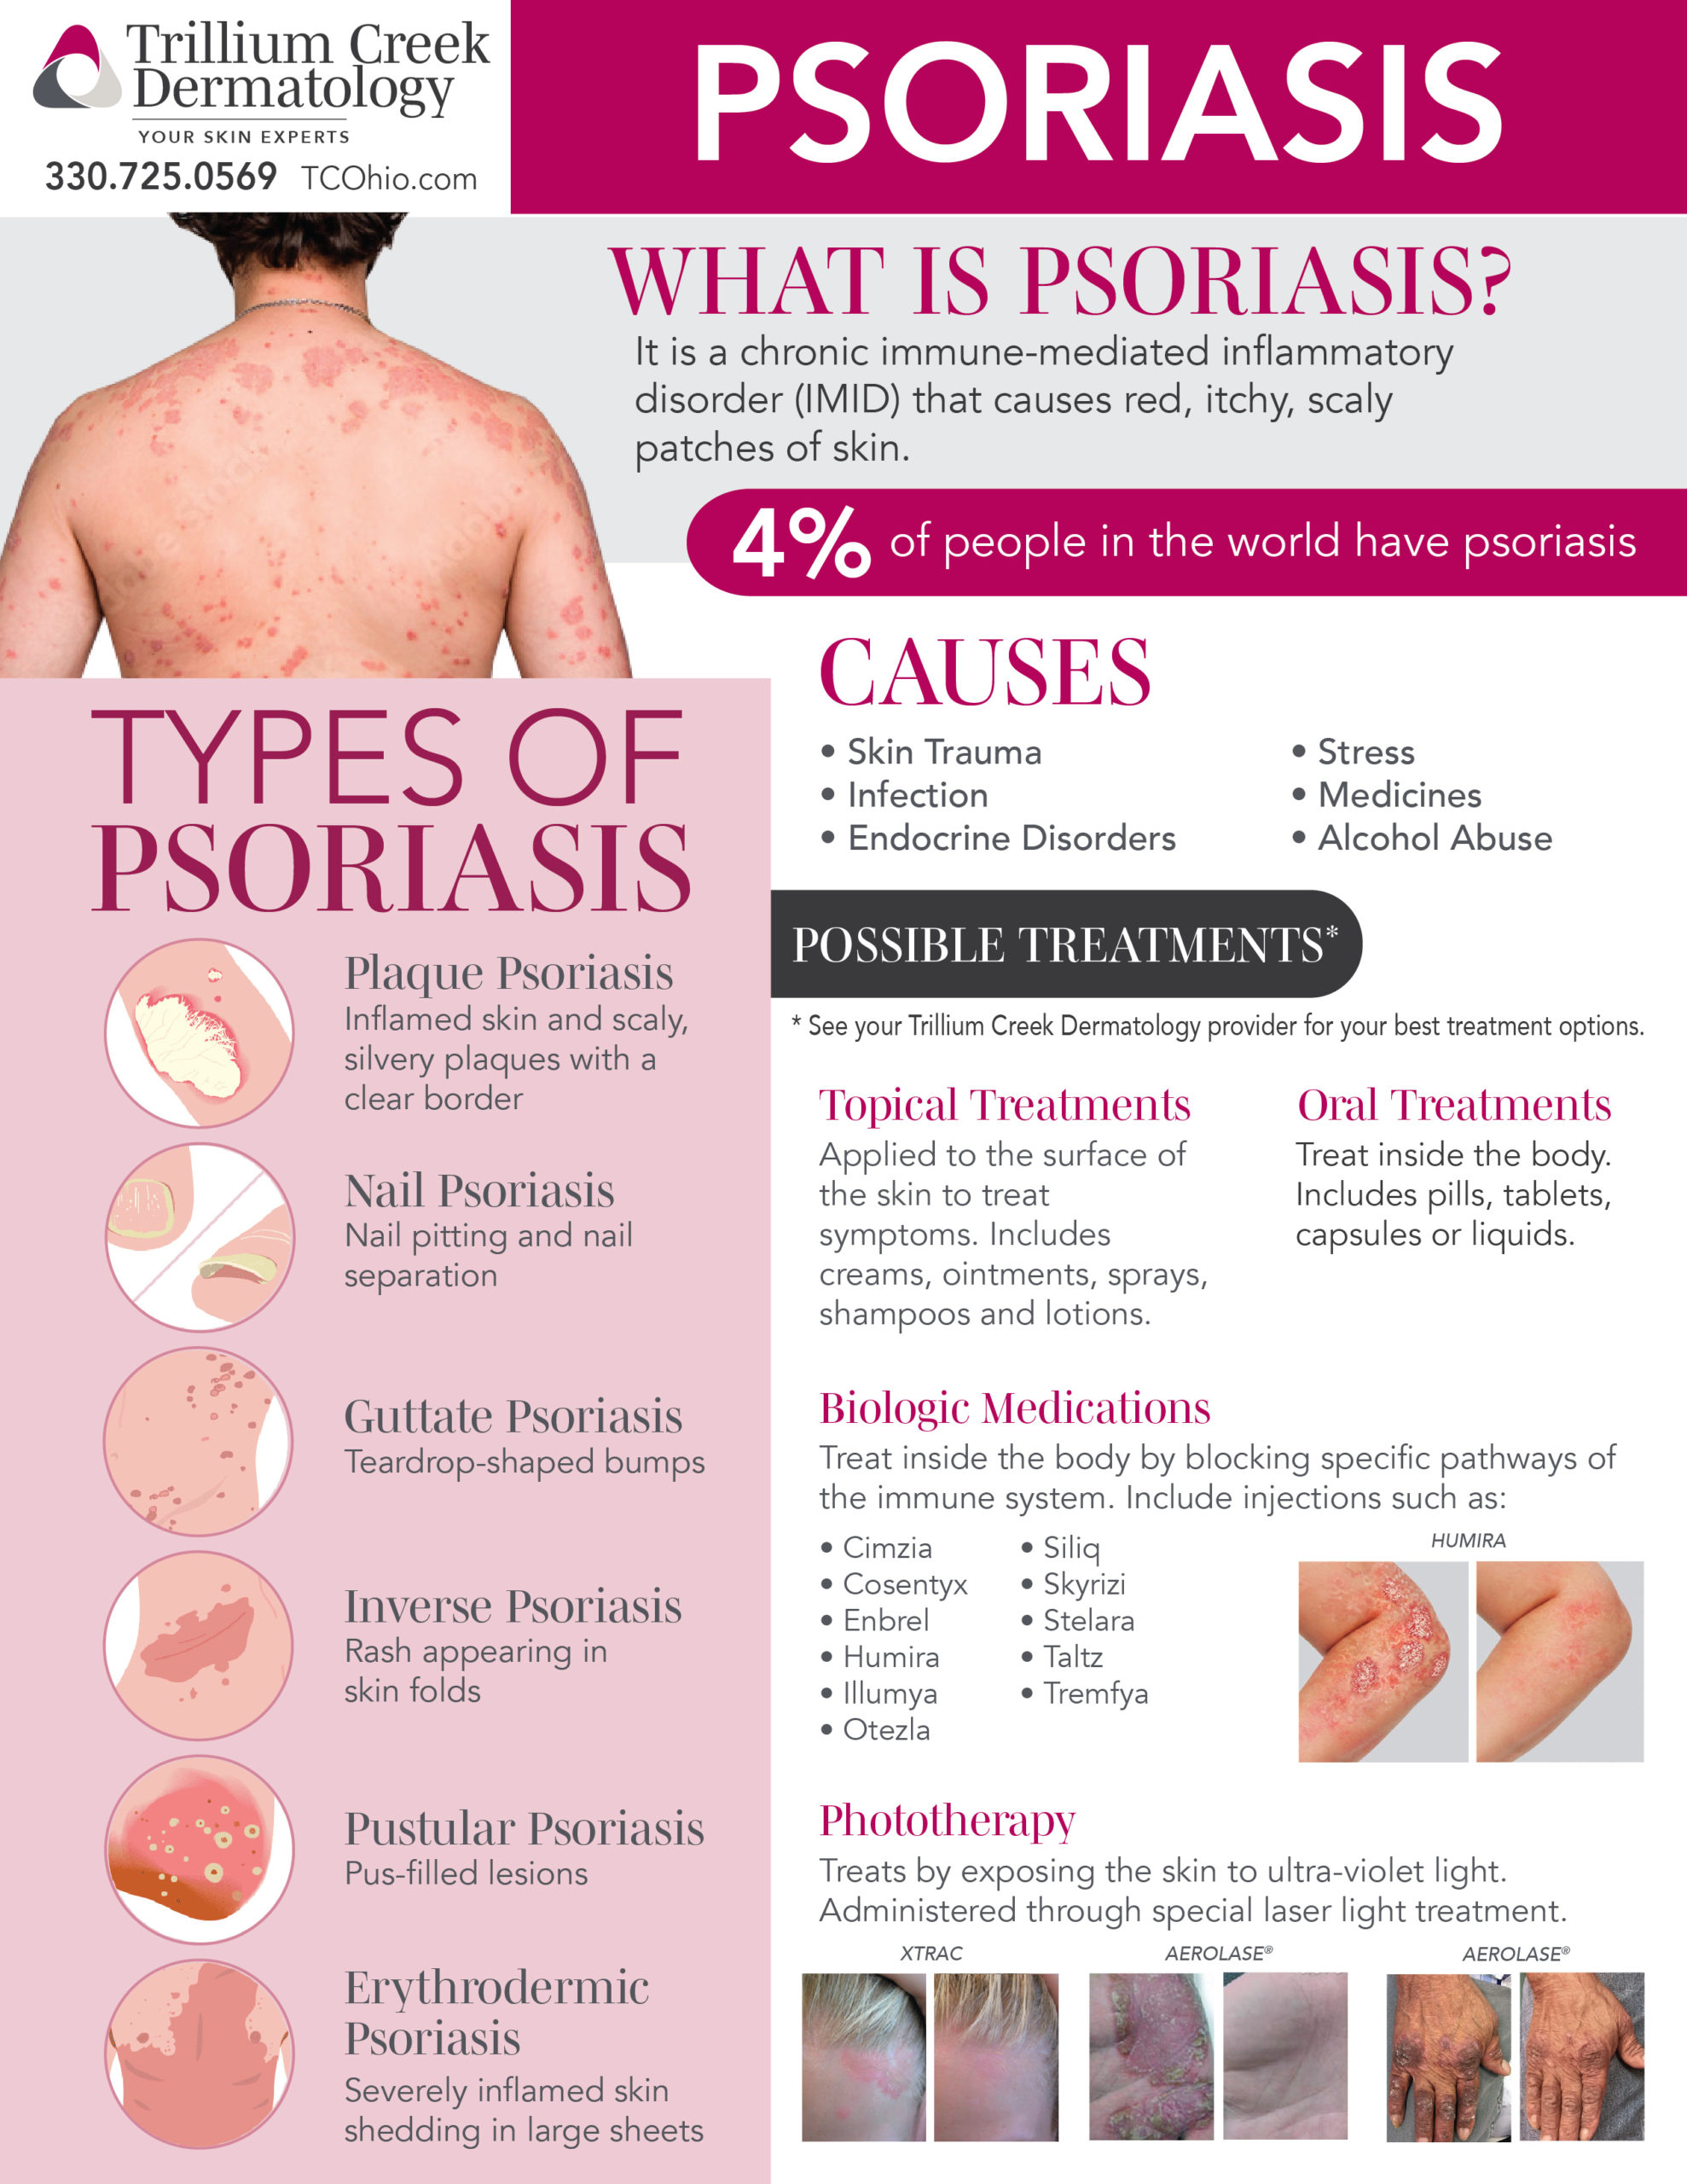 Psoriatic Arthritis Early Signs: 11 Signs and Symptoms to Watch For